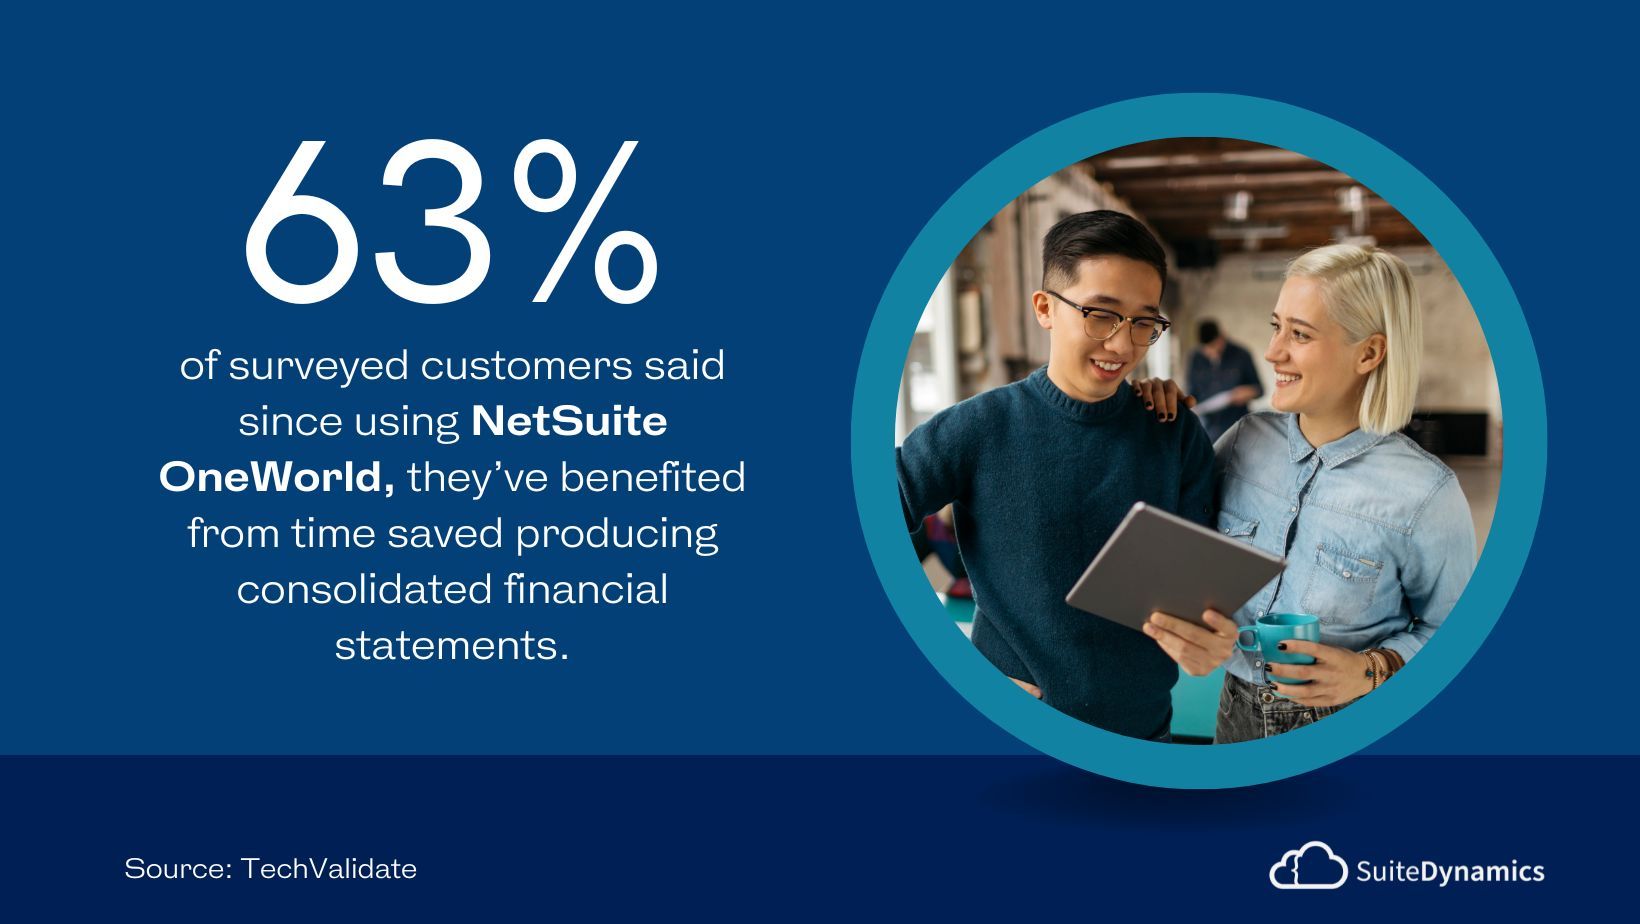 Graphic stating that 63% of surveyed customers said since using NetSuite OneWorld they’ve benefited from time saved producing consolidated financial statements.